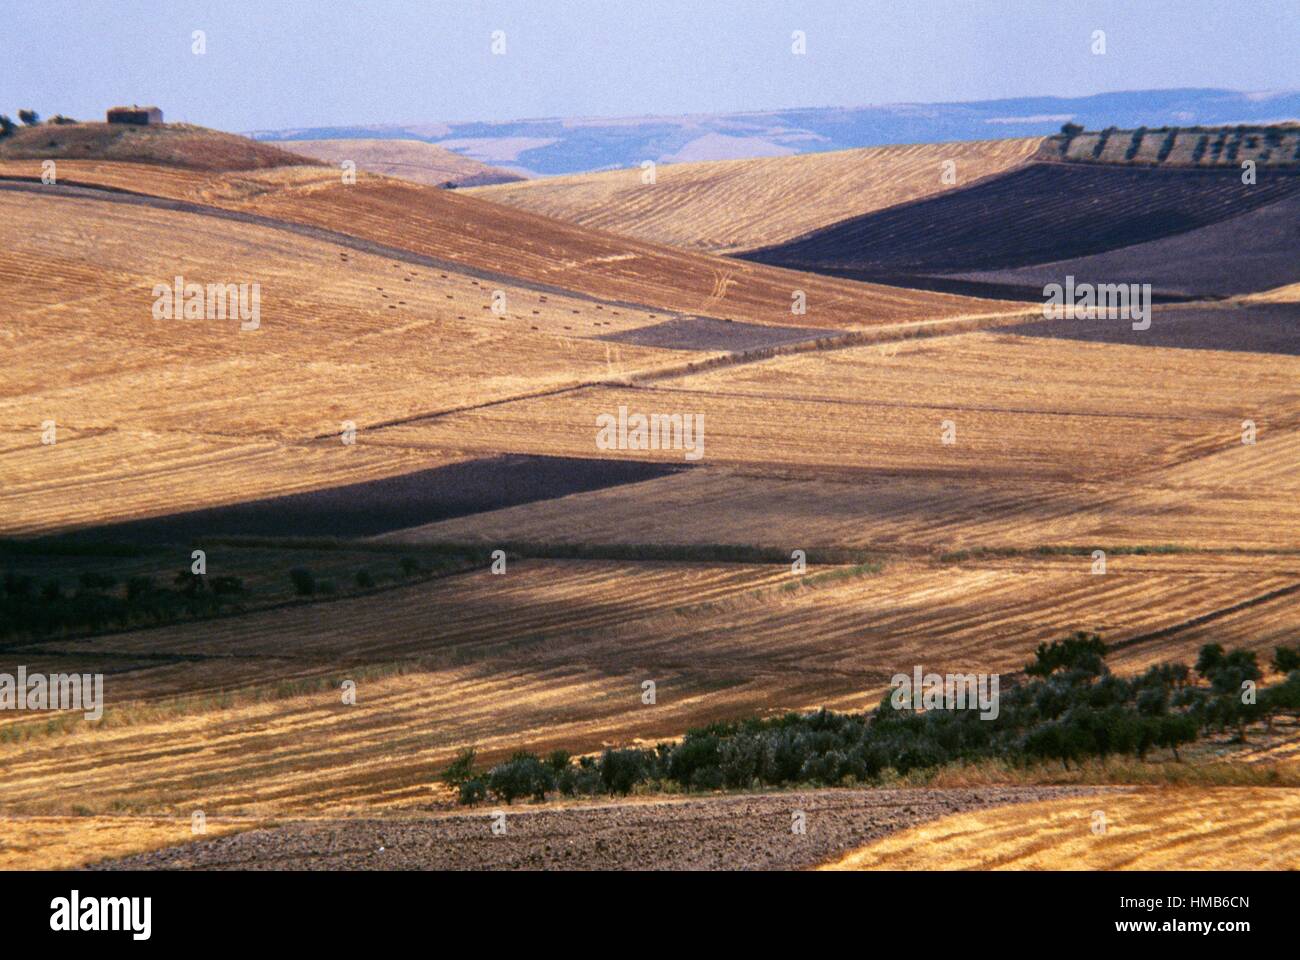 Landscape with cultivated fields on the Tavoliere delle Puglie plain, Apulia, Italy. Stock Photo